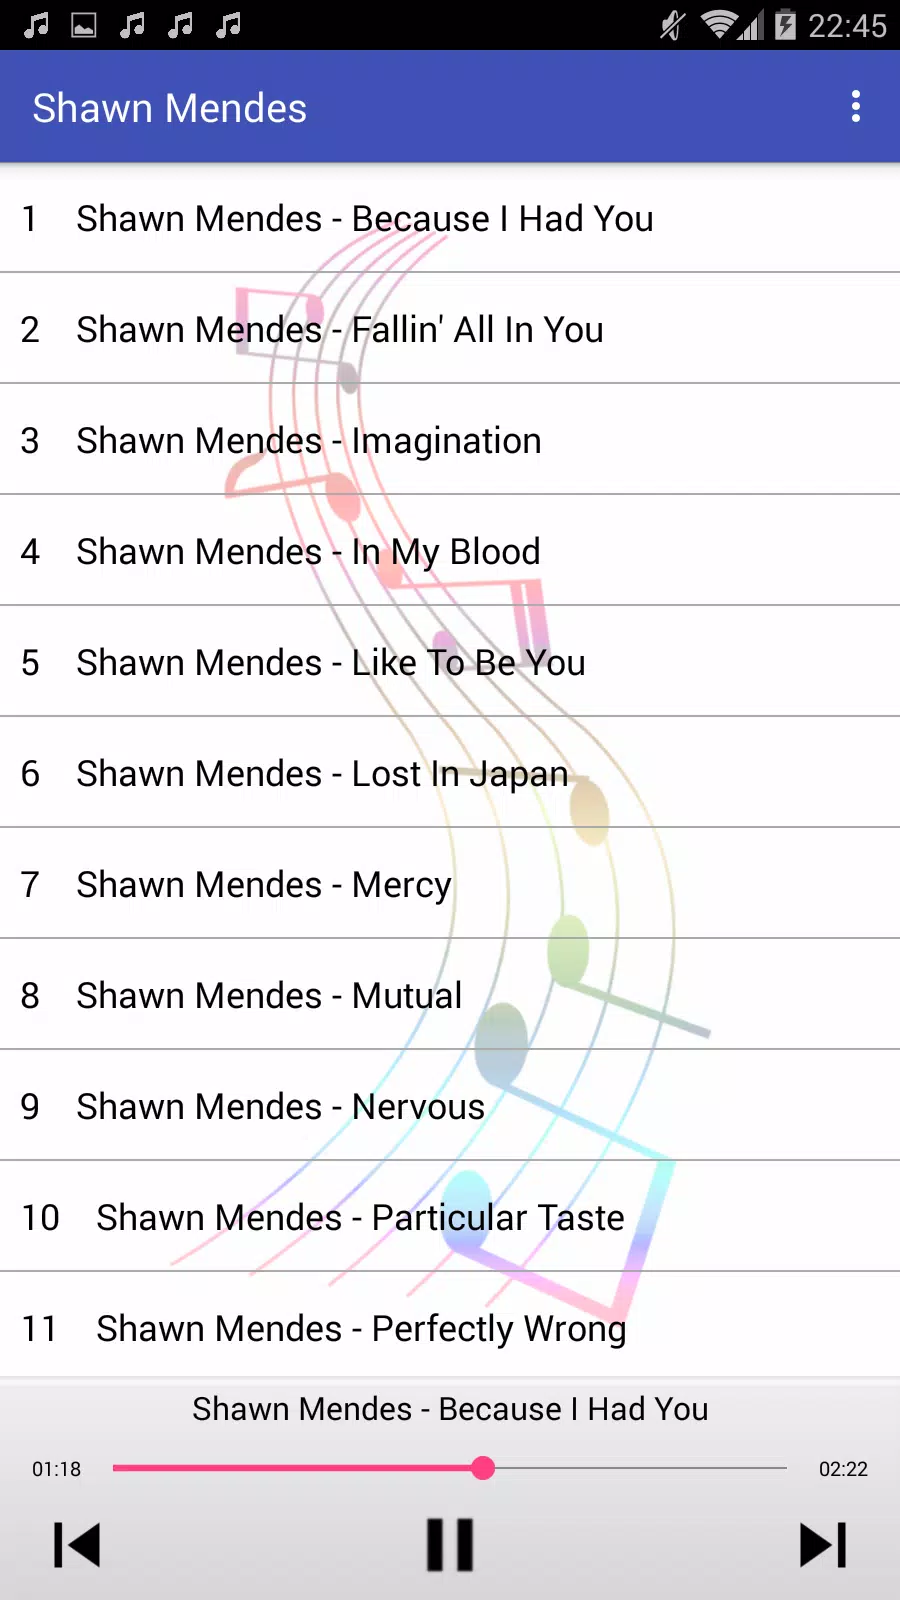 Shawn Mendes MP3 Music Songs APK voor Android Download